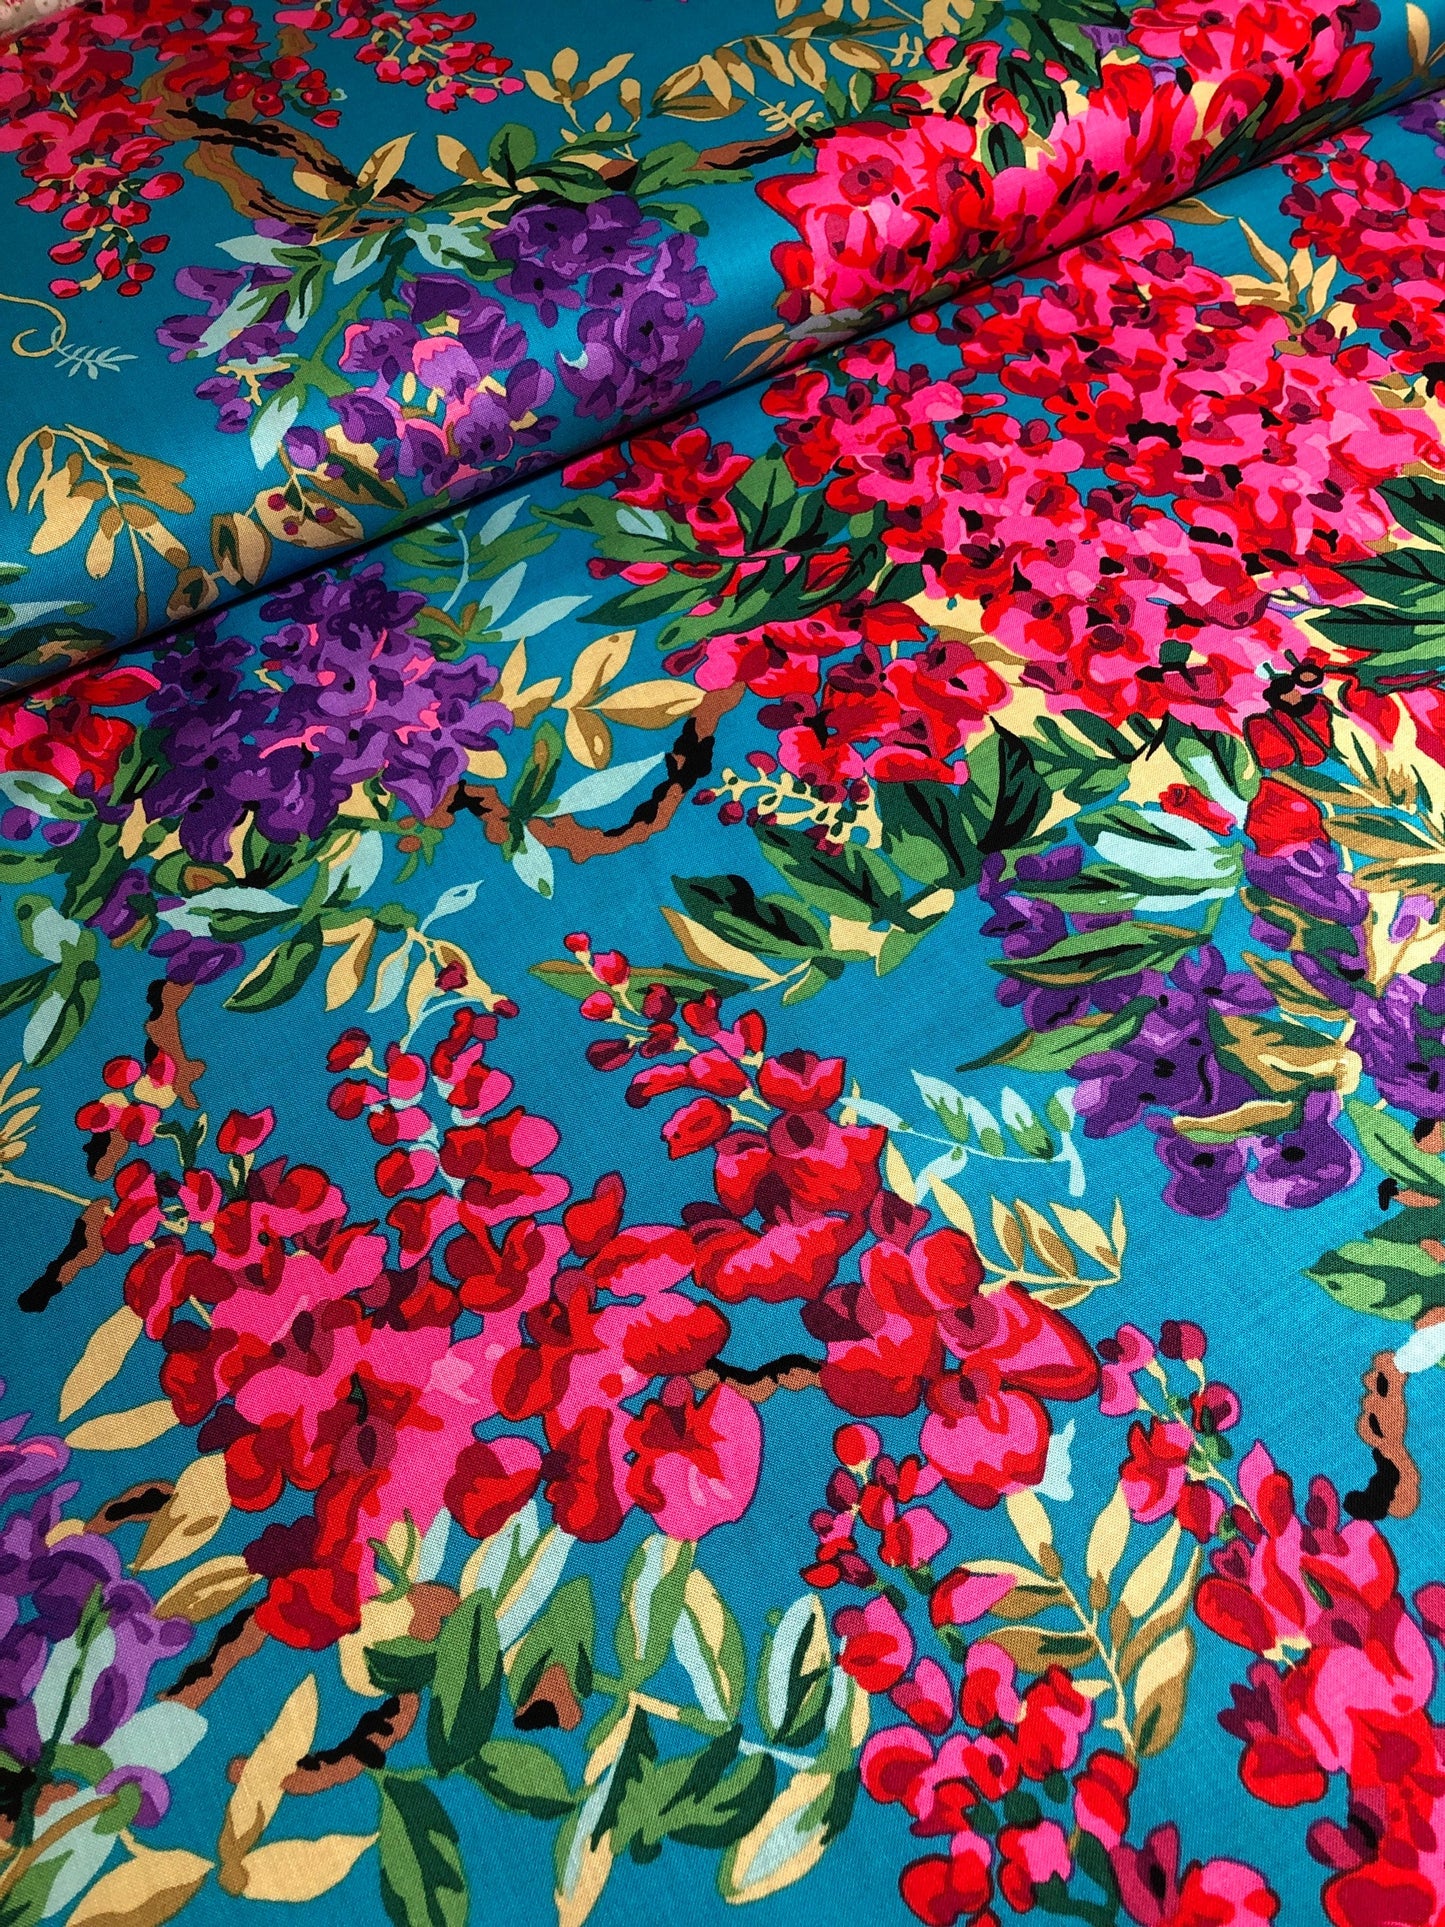 Wisteria Teal PWPJ102, Philip Jacobs, Kaffe Fassett, Free Spirit Fabric, Quilt Fabric, Cotton Fabric, Floral Fabric, Fabric By The Yard